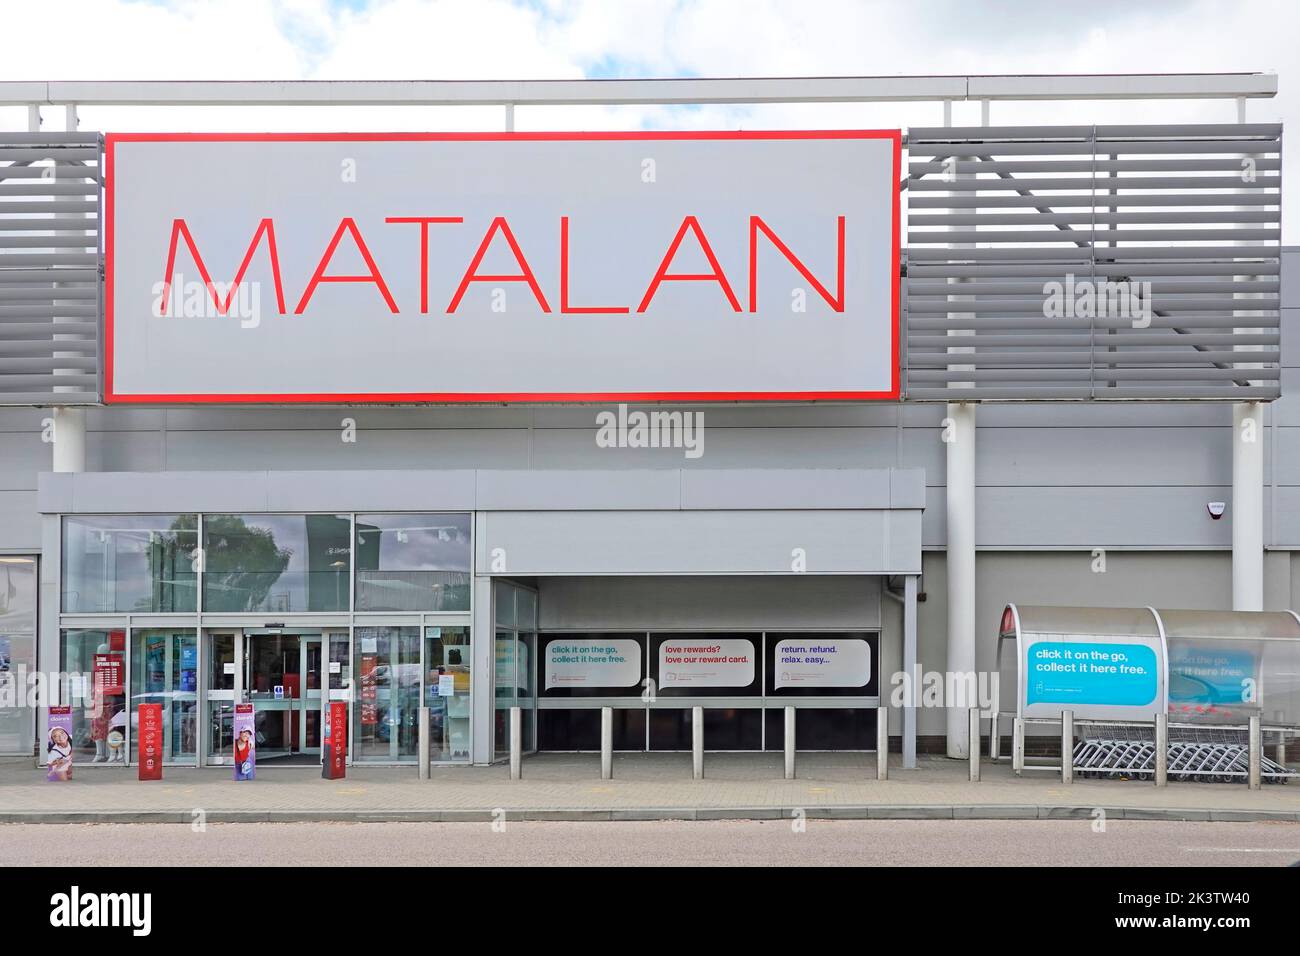 Matalan premises in modern retail park building a privately owned British fashion clothing chain store homeware retailer business Lakeside England UK Stock Photo